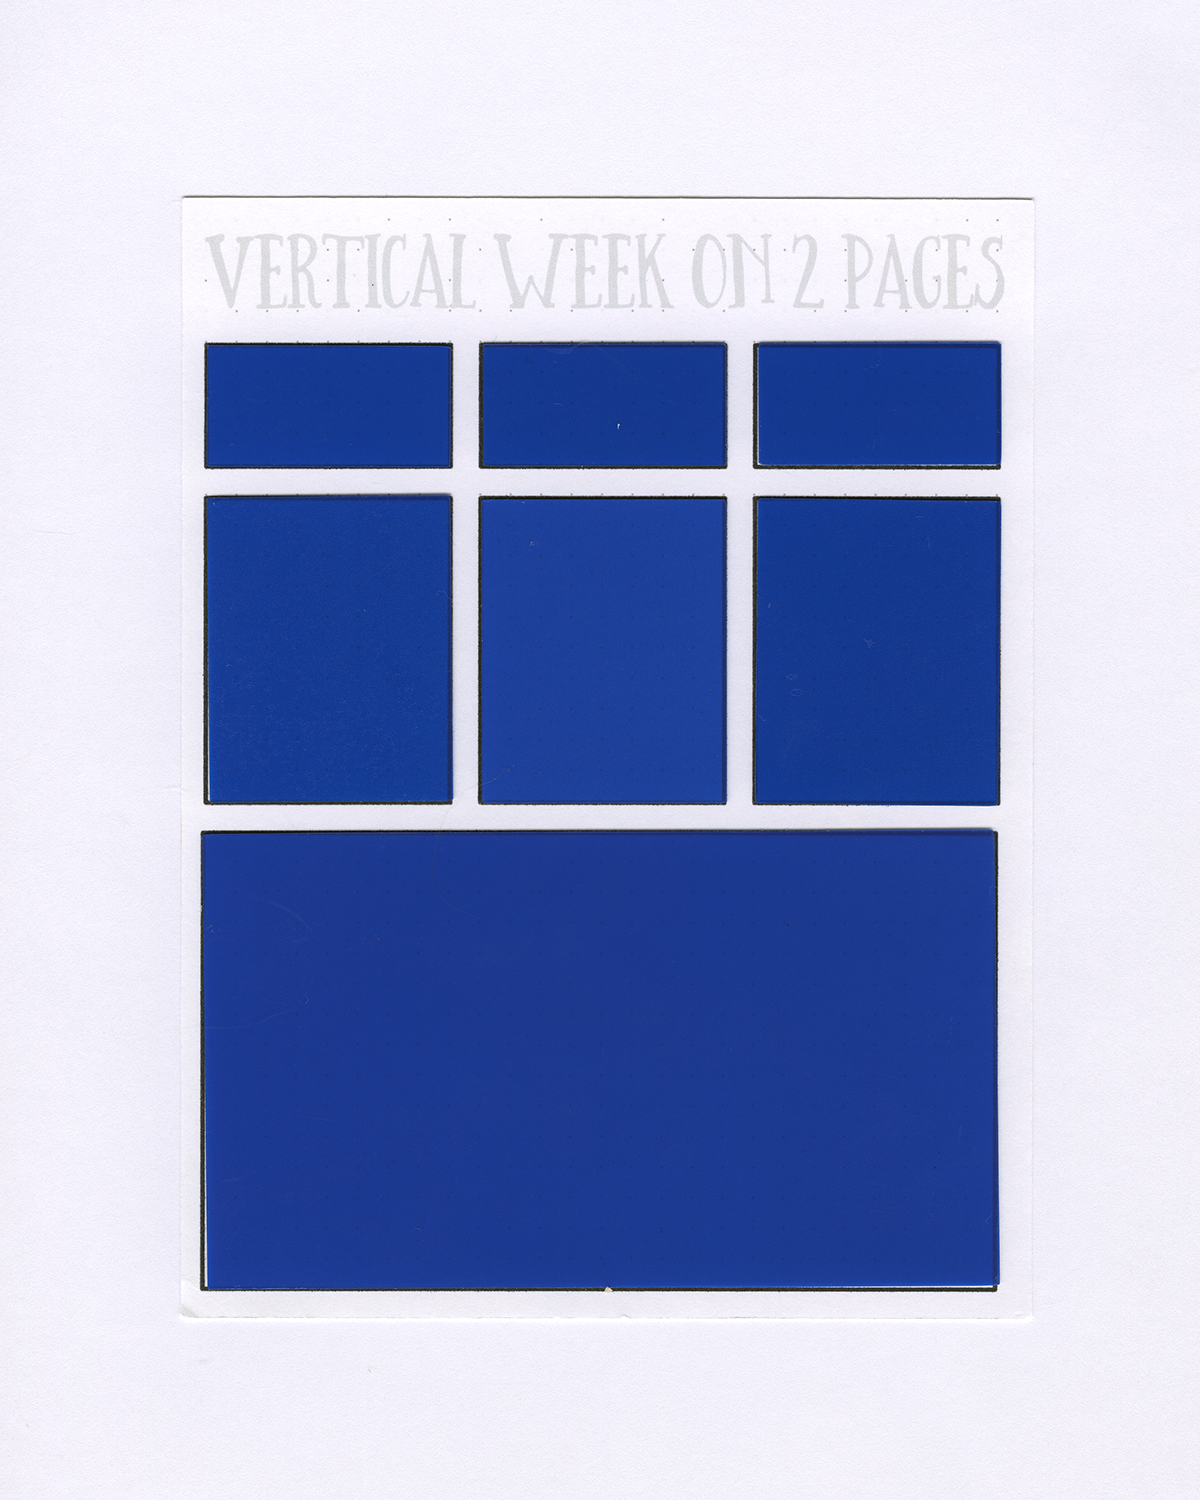 VERTICAL WEEK ON 2 PAGES Stencil Mask